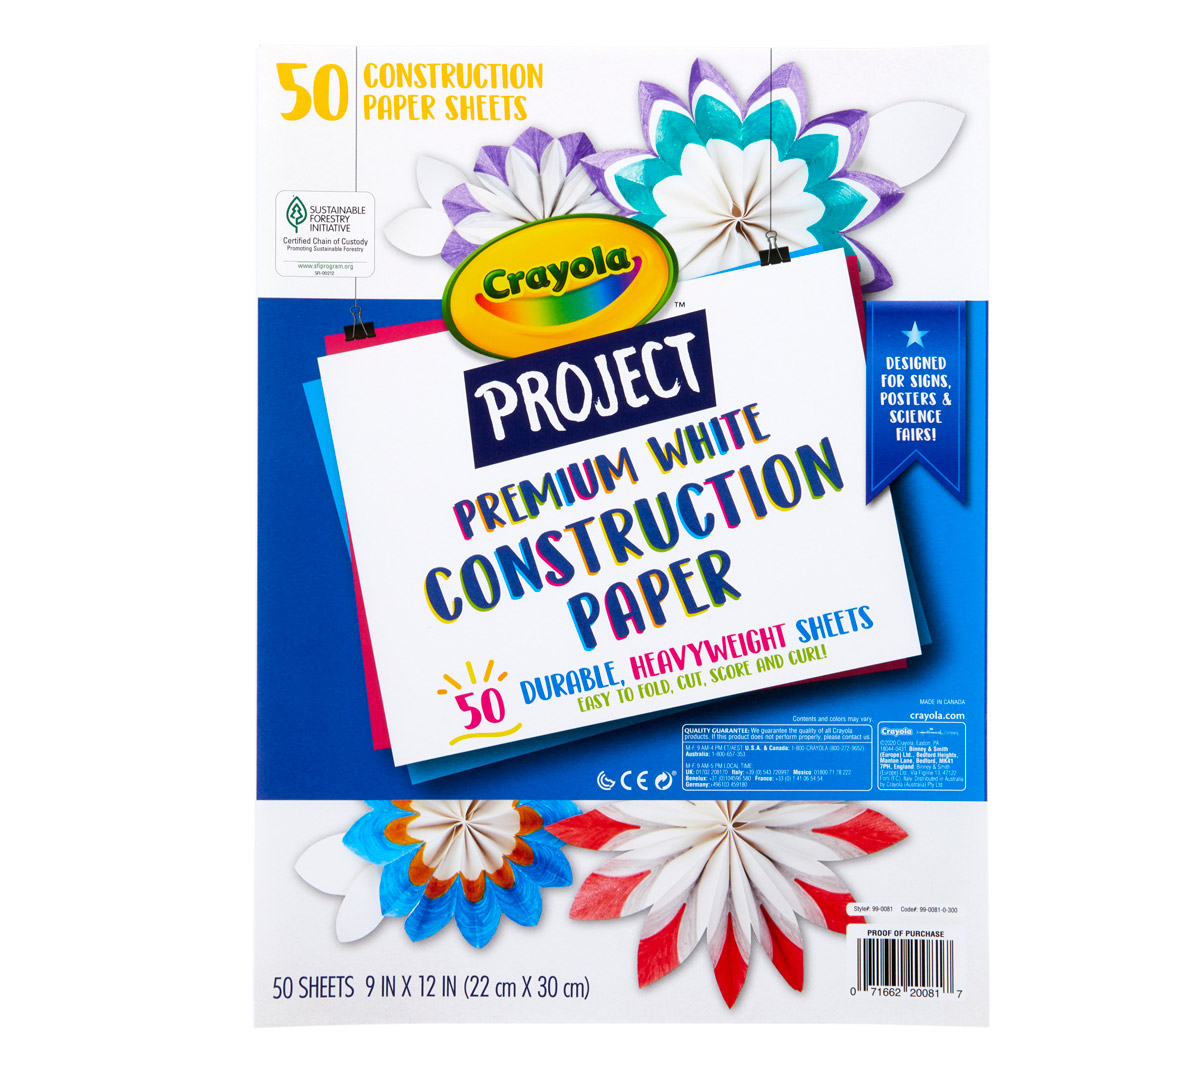 Premium White Crayola Construction Paper 50-Pack Only $2.21 on